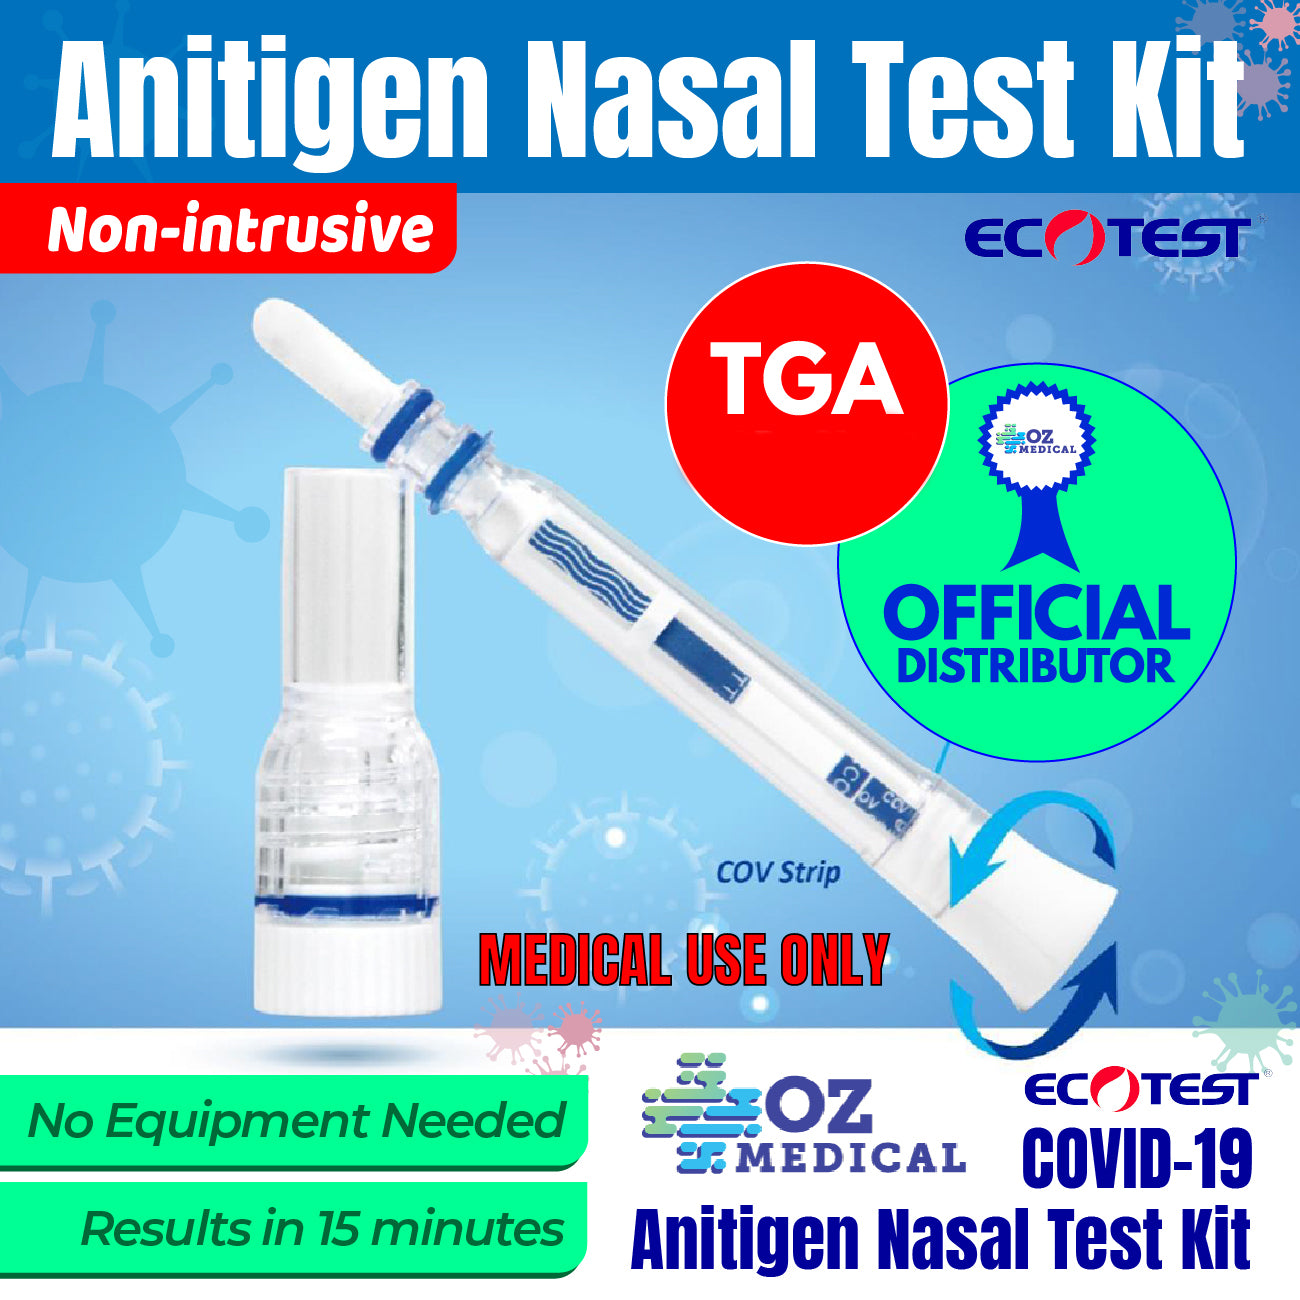 ECOTEST Antigen Nasal Test Kit -  VERY HIGH SENSITIVITY- NOW AVAILABLE FOR HOME TESTING